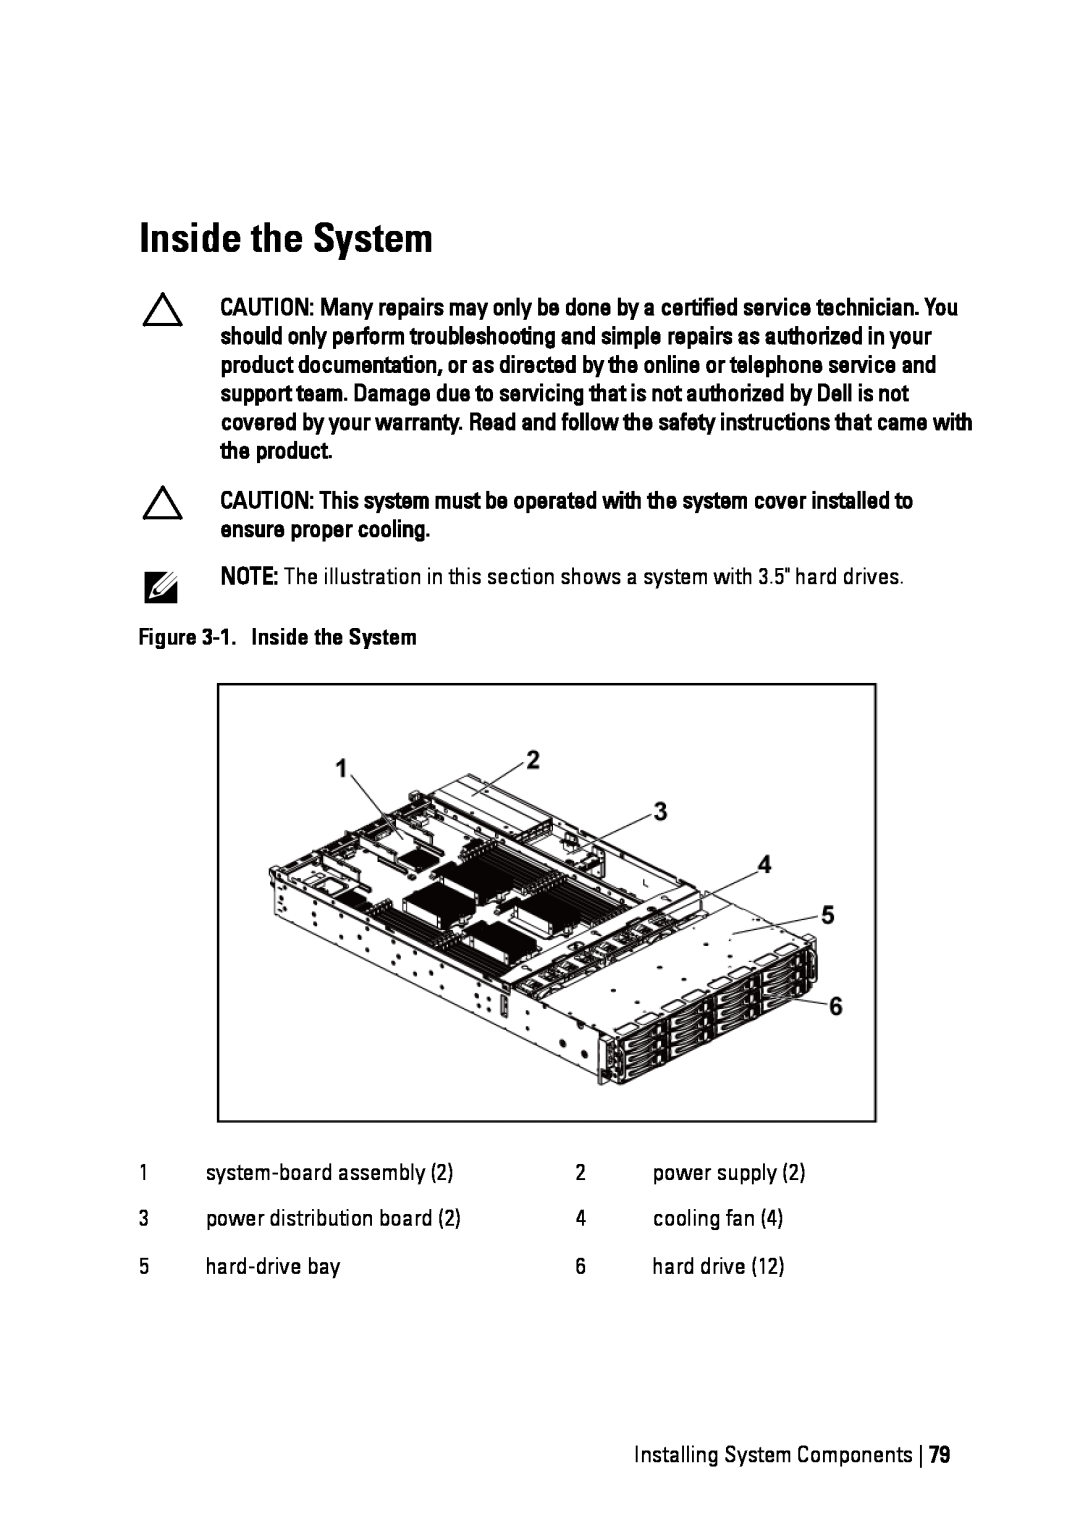 Dell C6145 manual 1. Inside the System, system-board assembly, power distribution board, cooling fan, hard-drive bay 